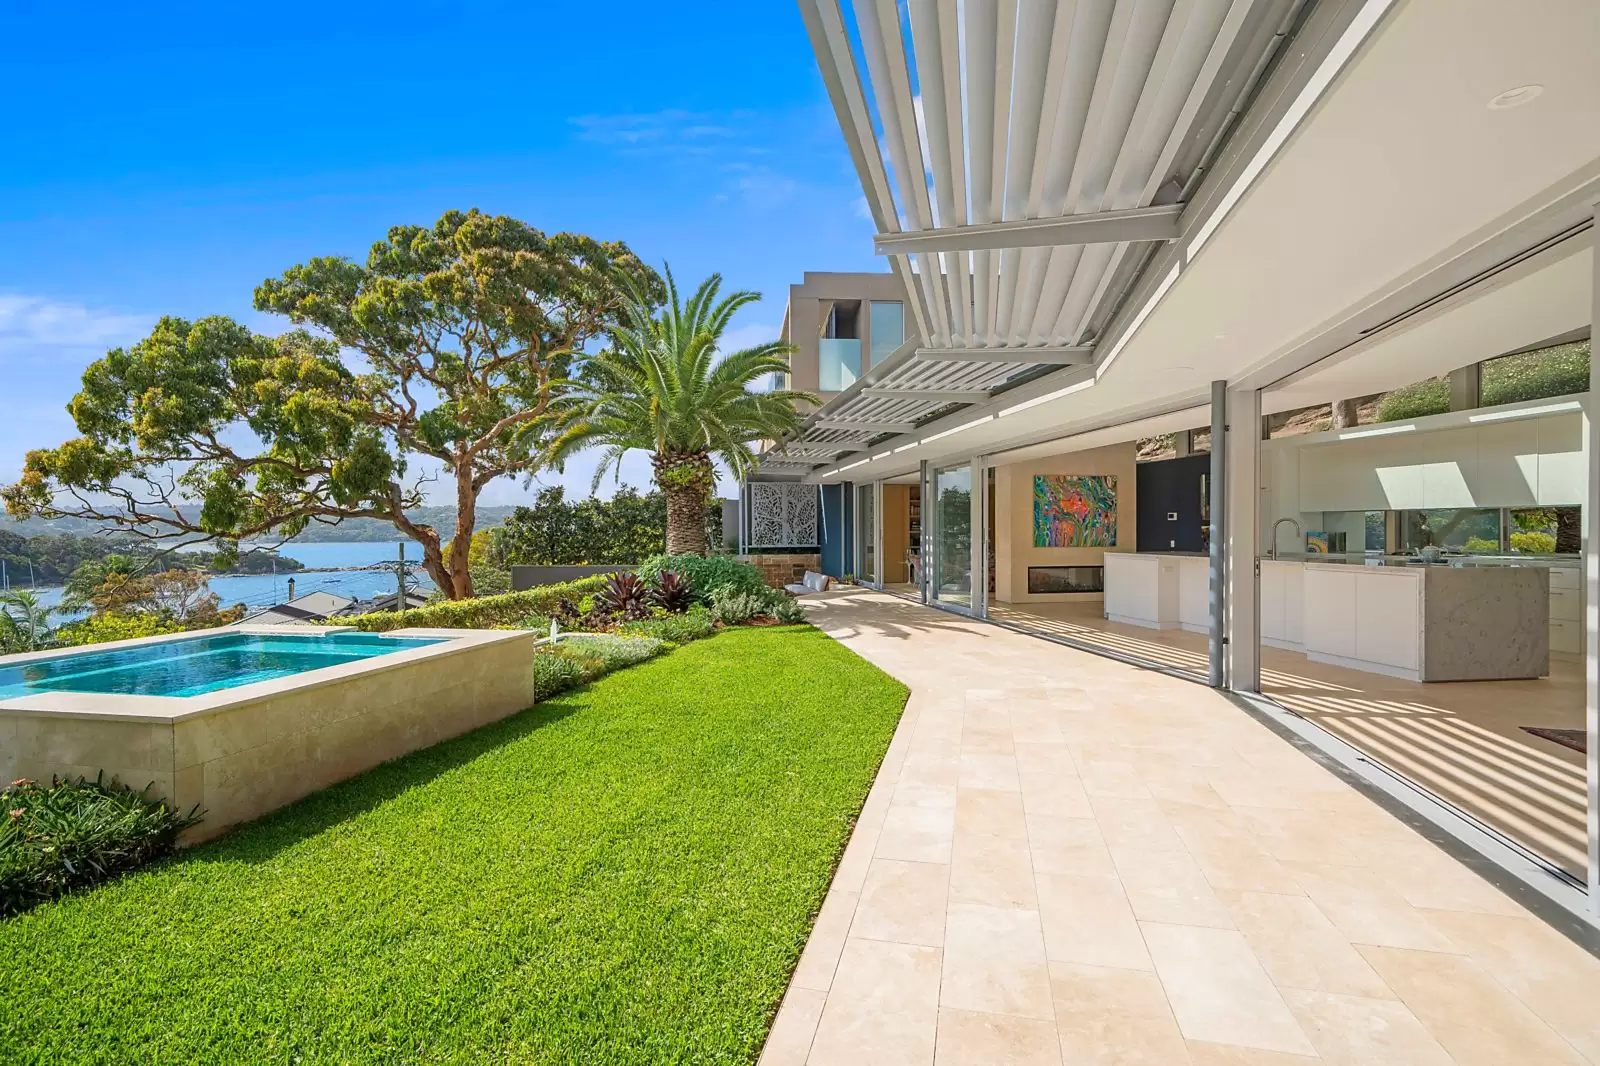 Photo #21: 97 Wentworth Road, Vaucluse - For Sale by Sydney Sotheby's International Realty